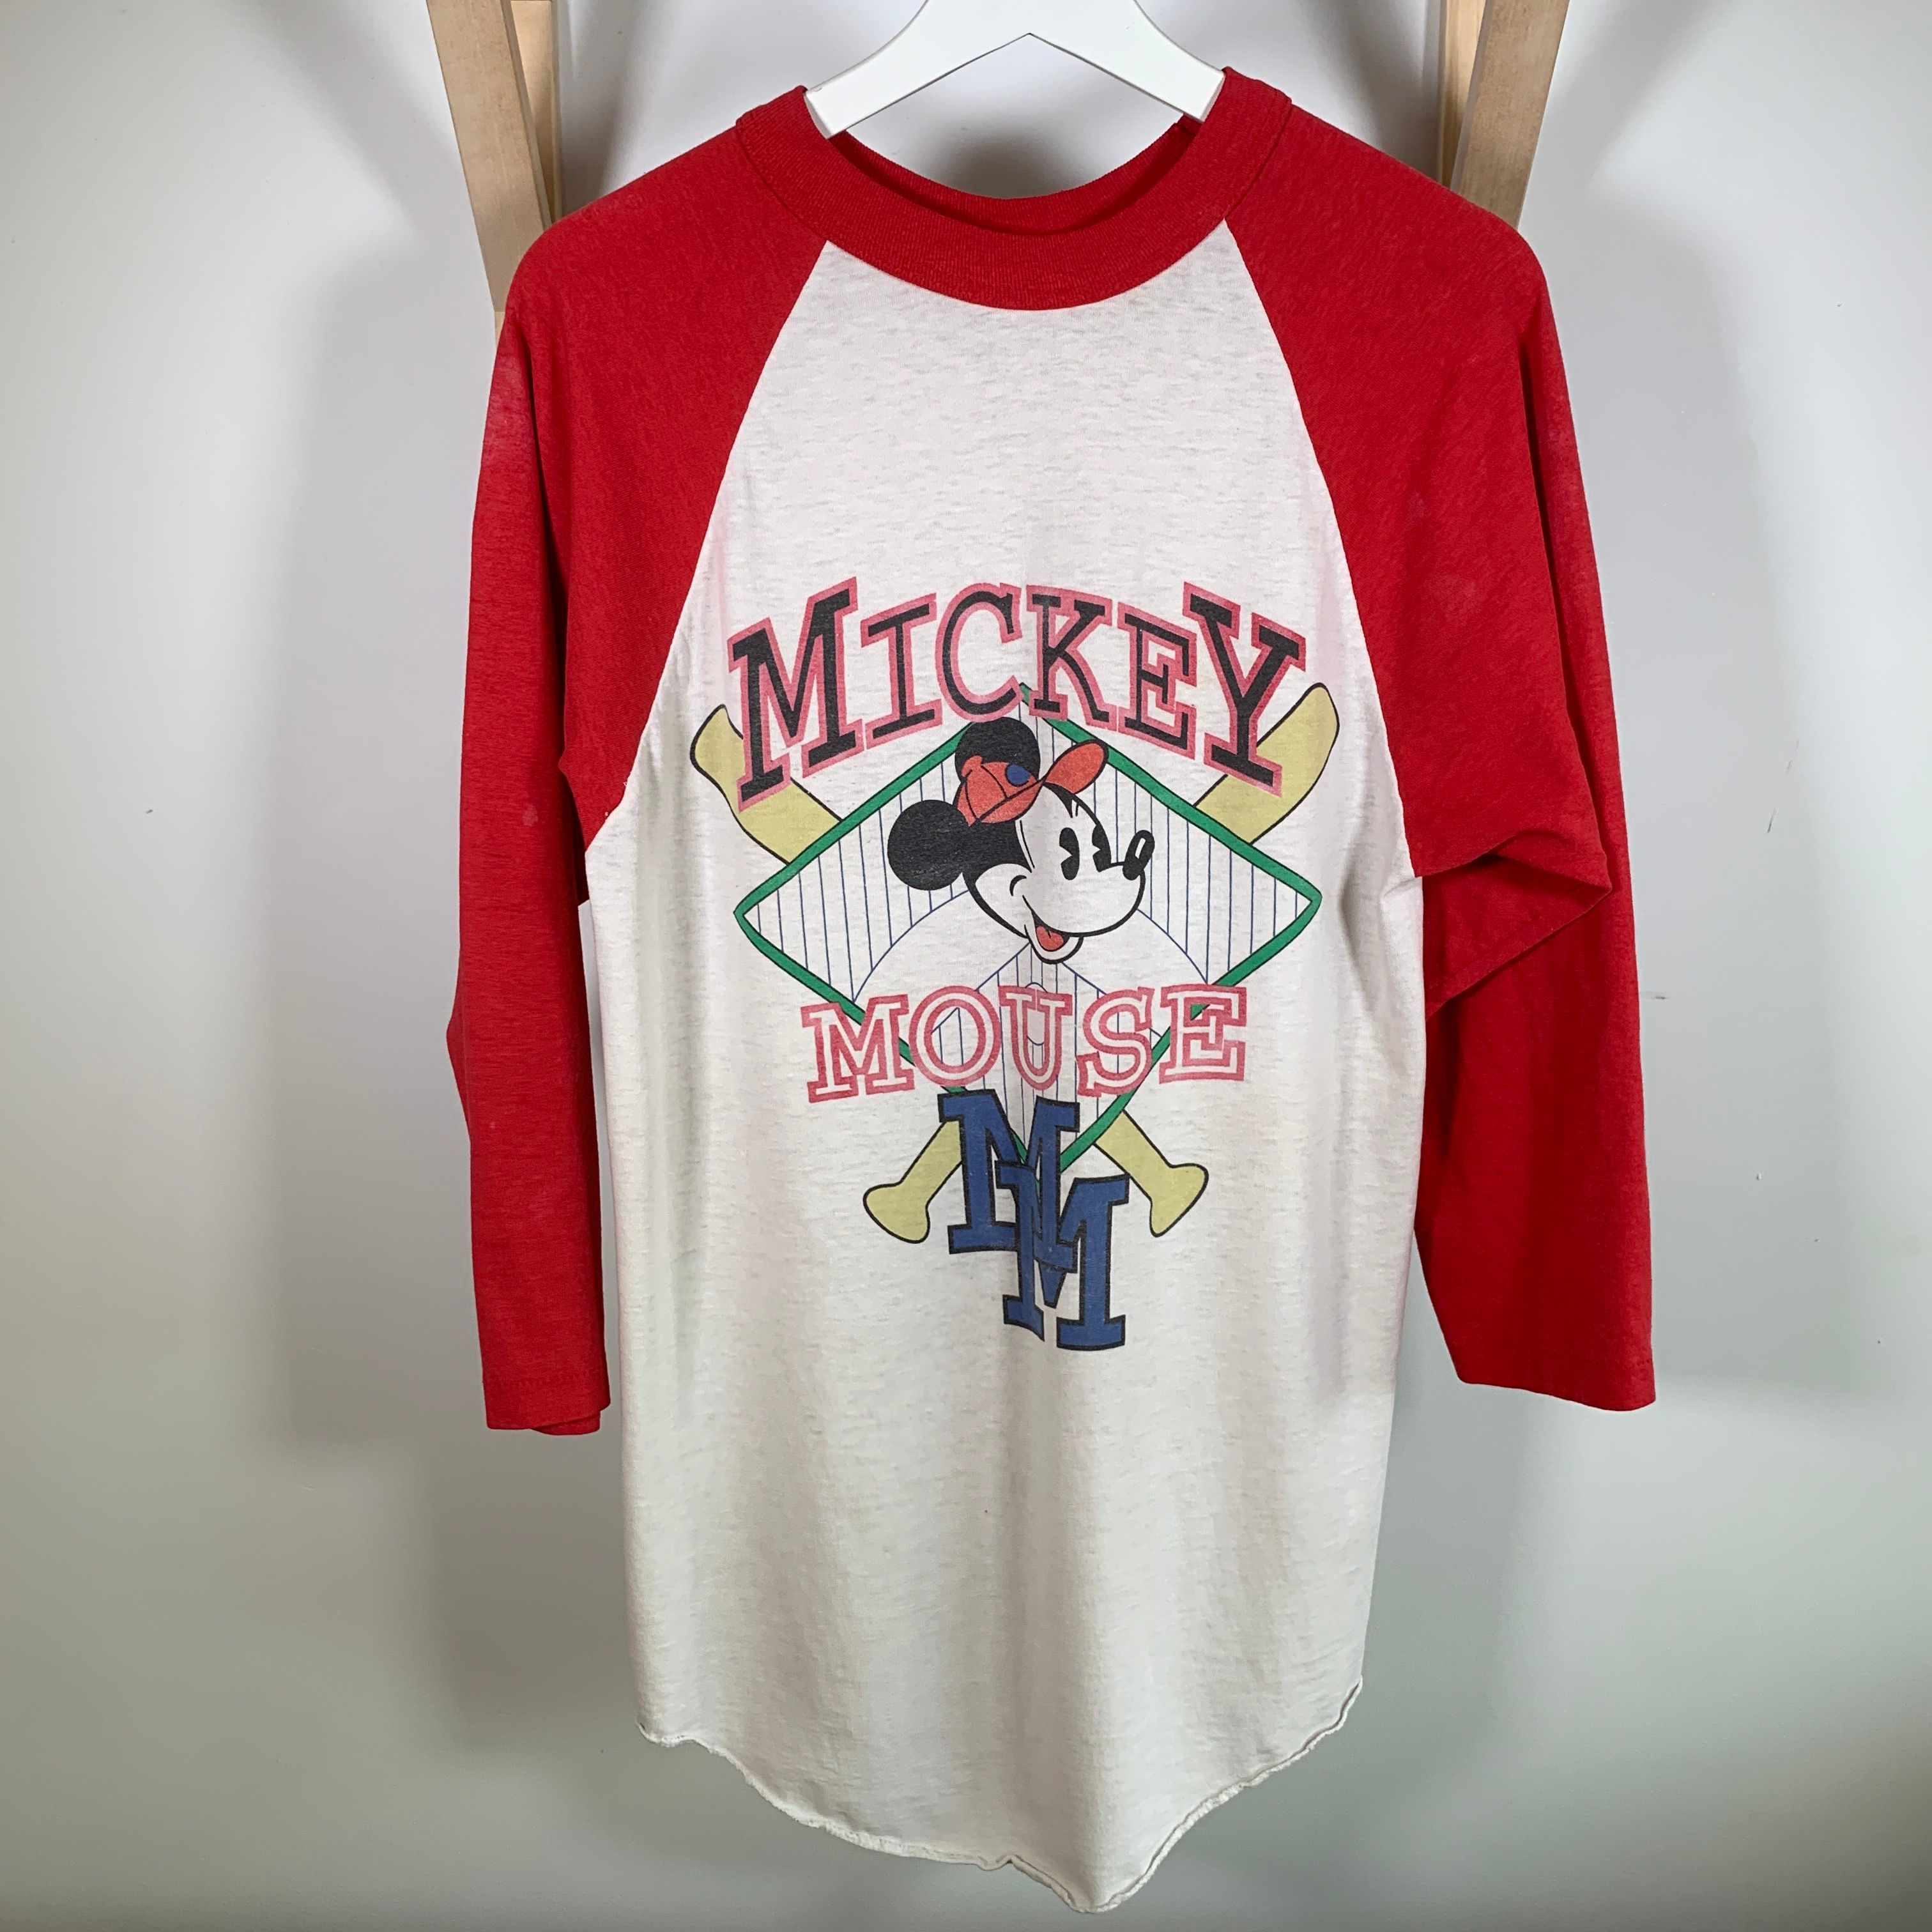 Pre-owned Disney X Mickey Mouse 80's 90's Mickey Mouse Disney Baseball Shirt Travis Style In Red White